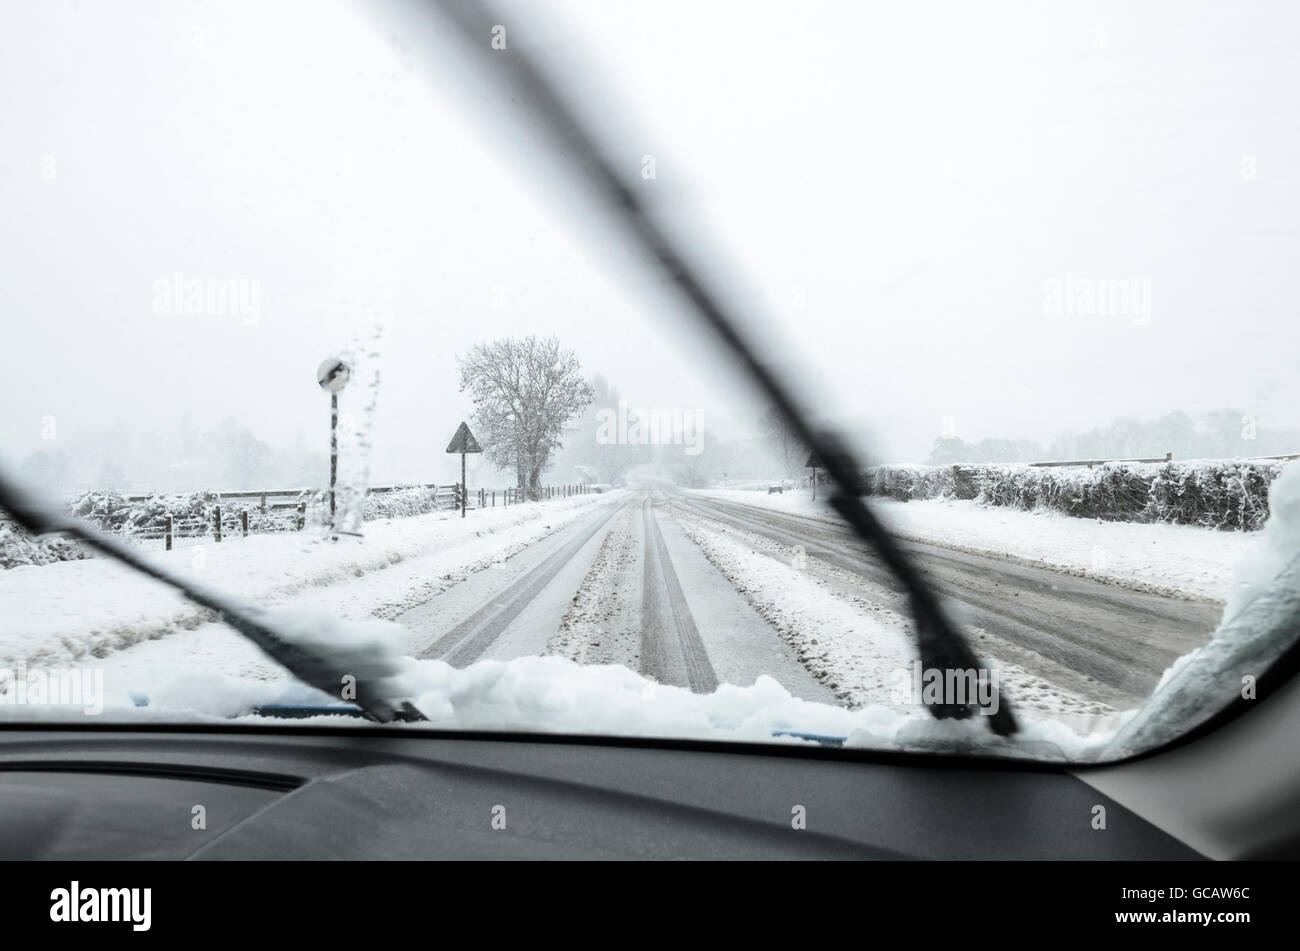 The view though the windscreen of a motor car being along a snow covered rural road. Stock Photo